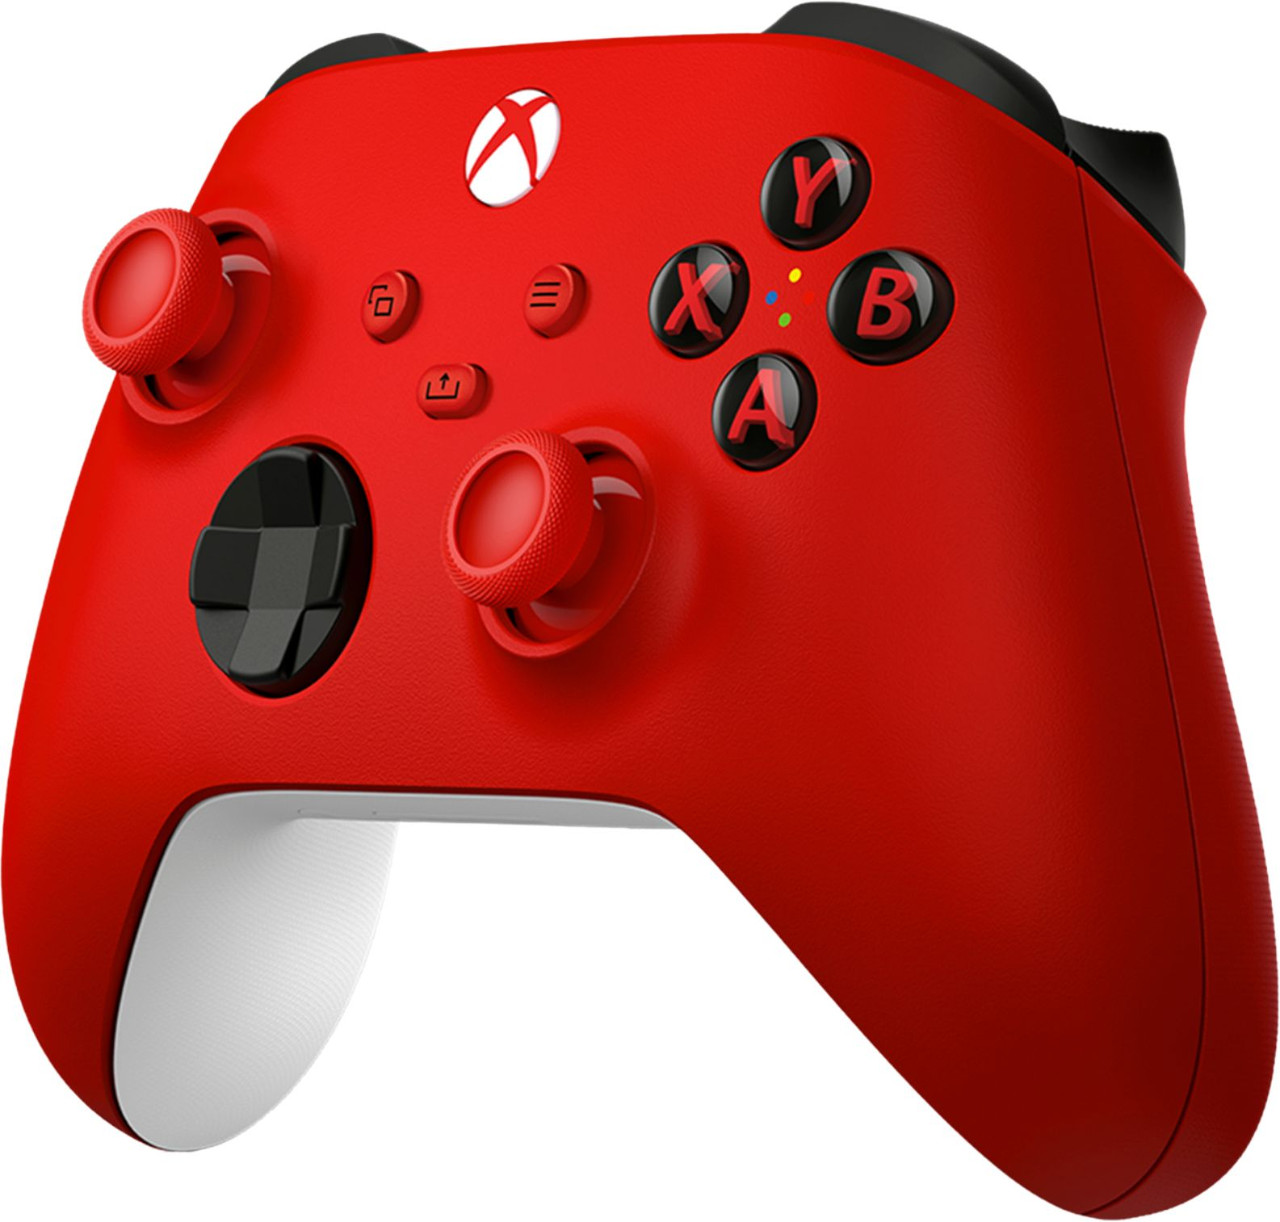 Microsoft - Controller for Xbox Series X, Xbox Series S, and Xbox One (Latest Model) - Pulse Red